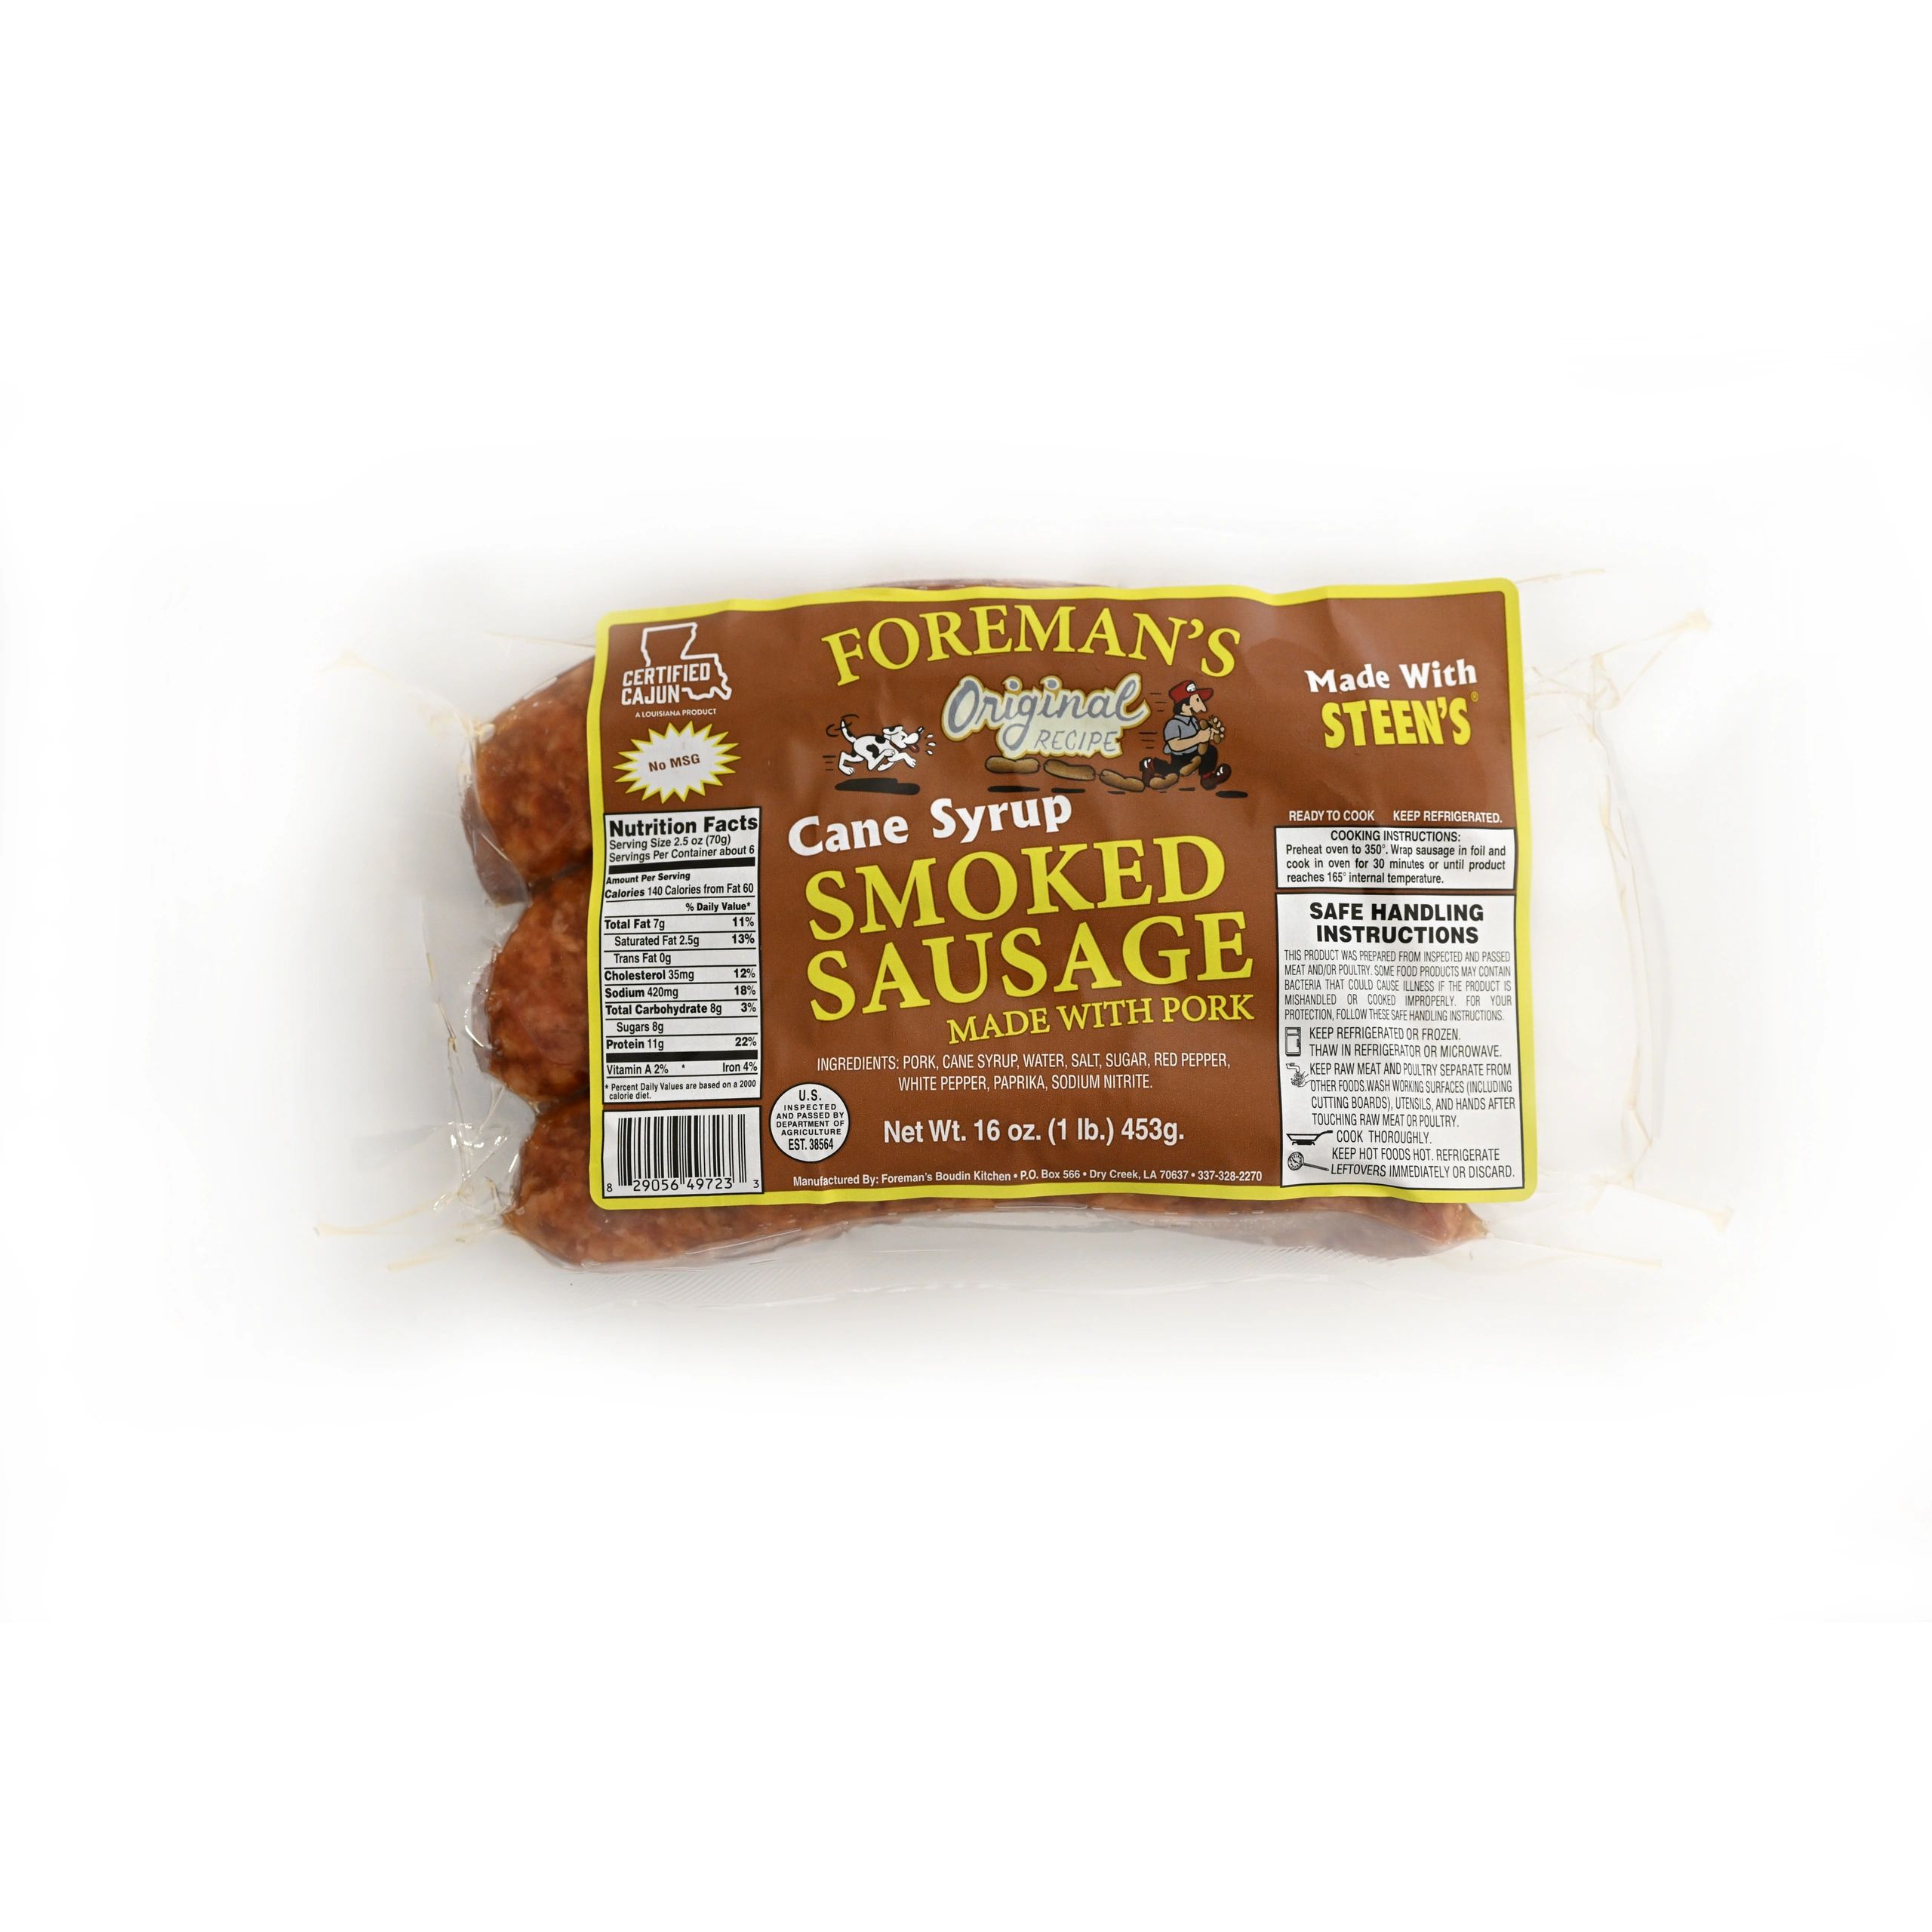 Foremans Cane Syrup Smoked Sausage made with Steen's and pork in 16oz package on a white background.